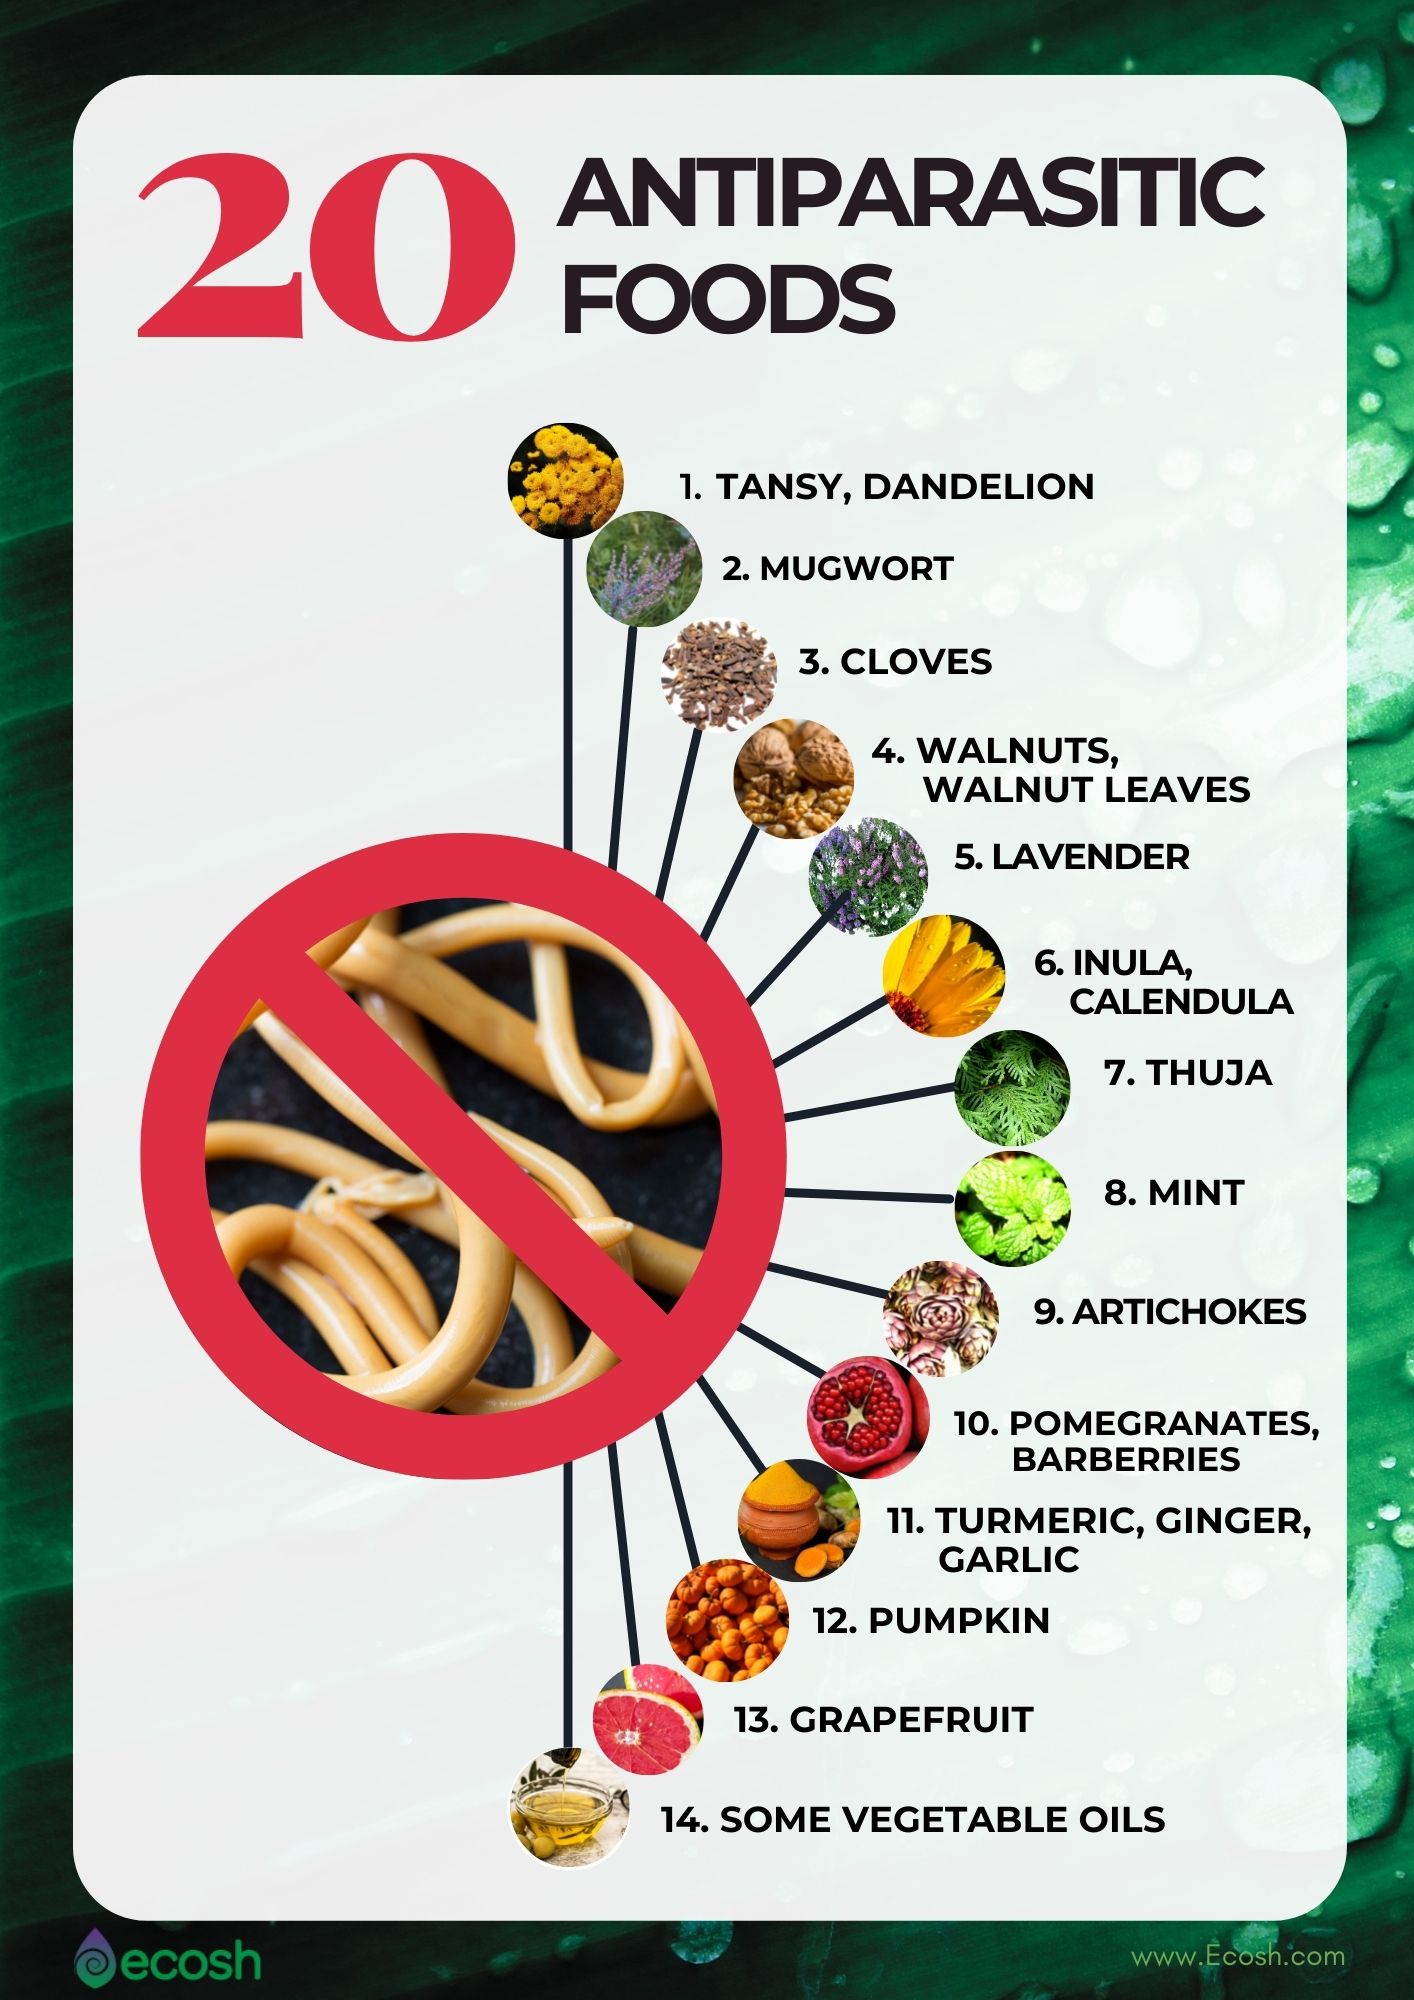 foods to avoid with parasites)